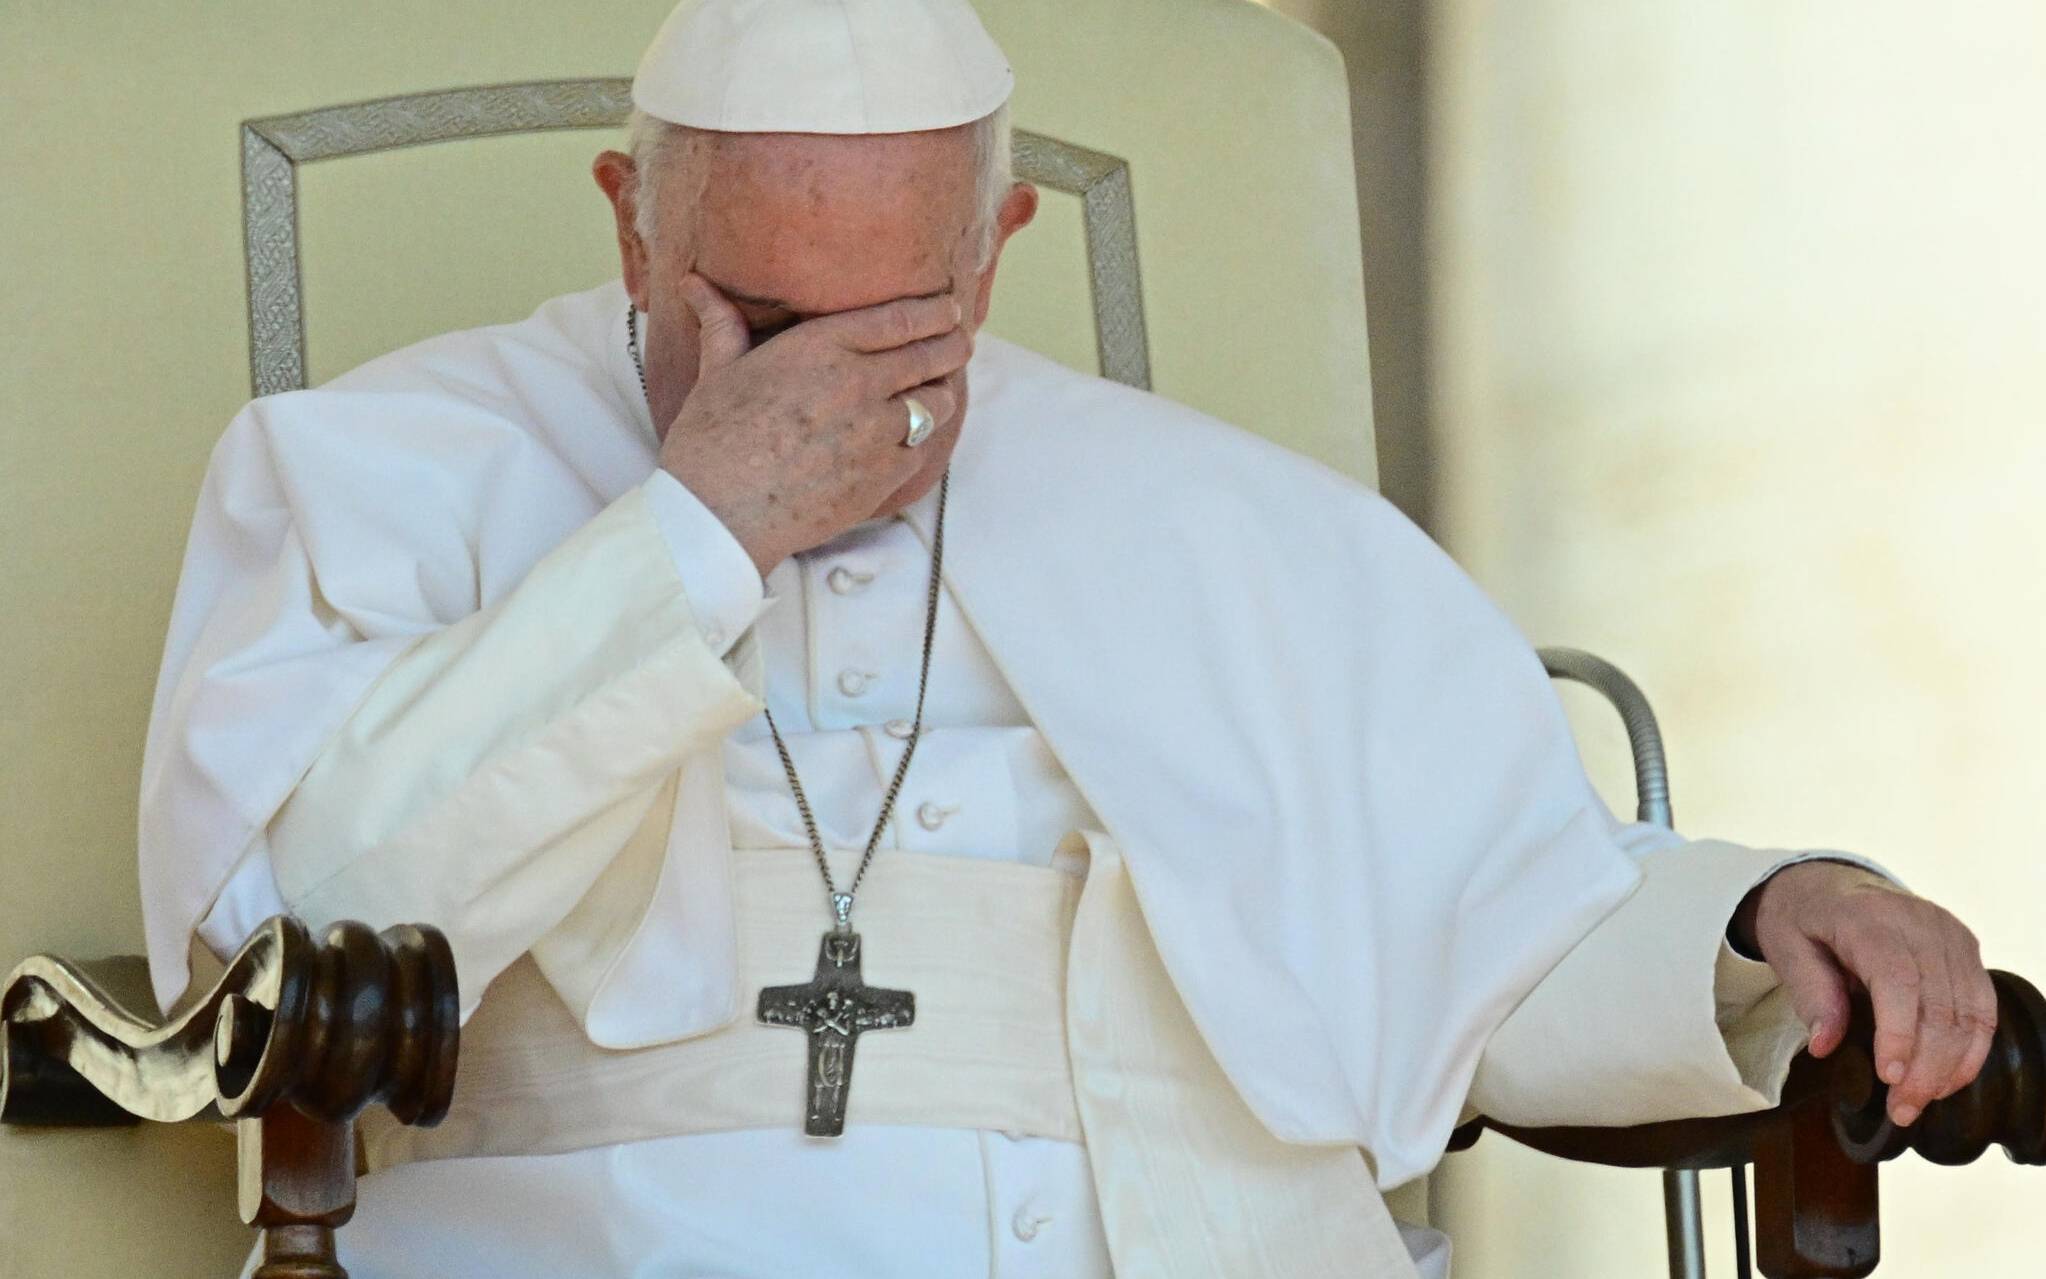 Pope Francis gathers his thoughts at the beginning of the weekly general audience on June 15, 2022 at St. Peter's square in The Vatican. (Photo by Vincenzo PINTO / AFP)